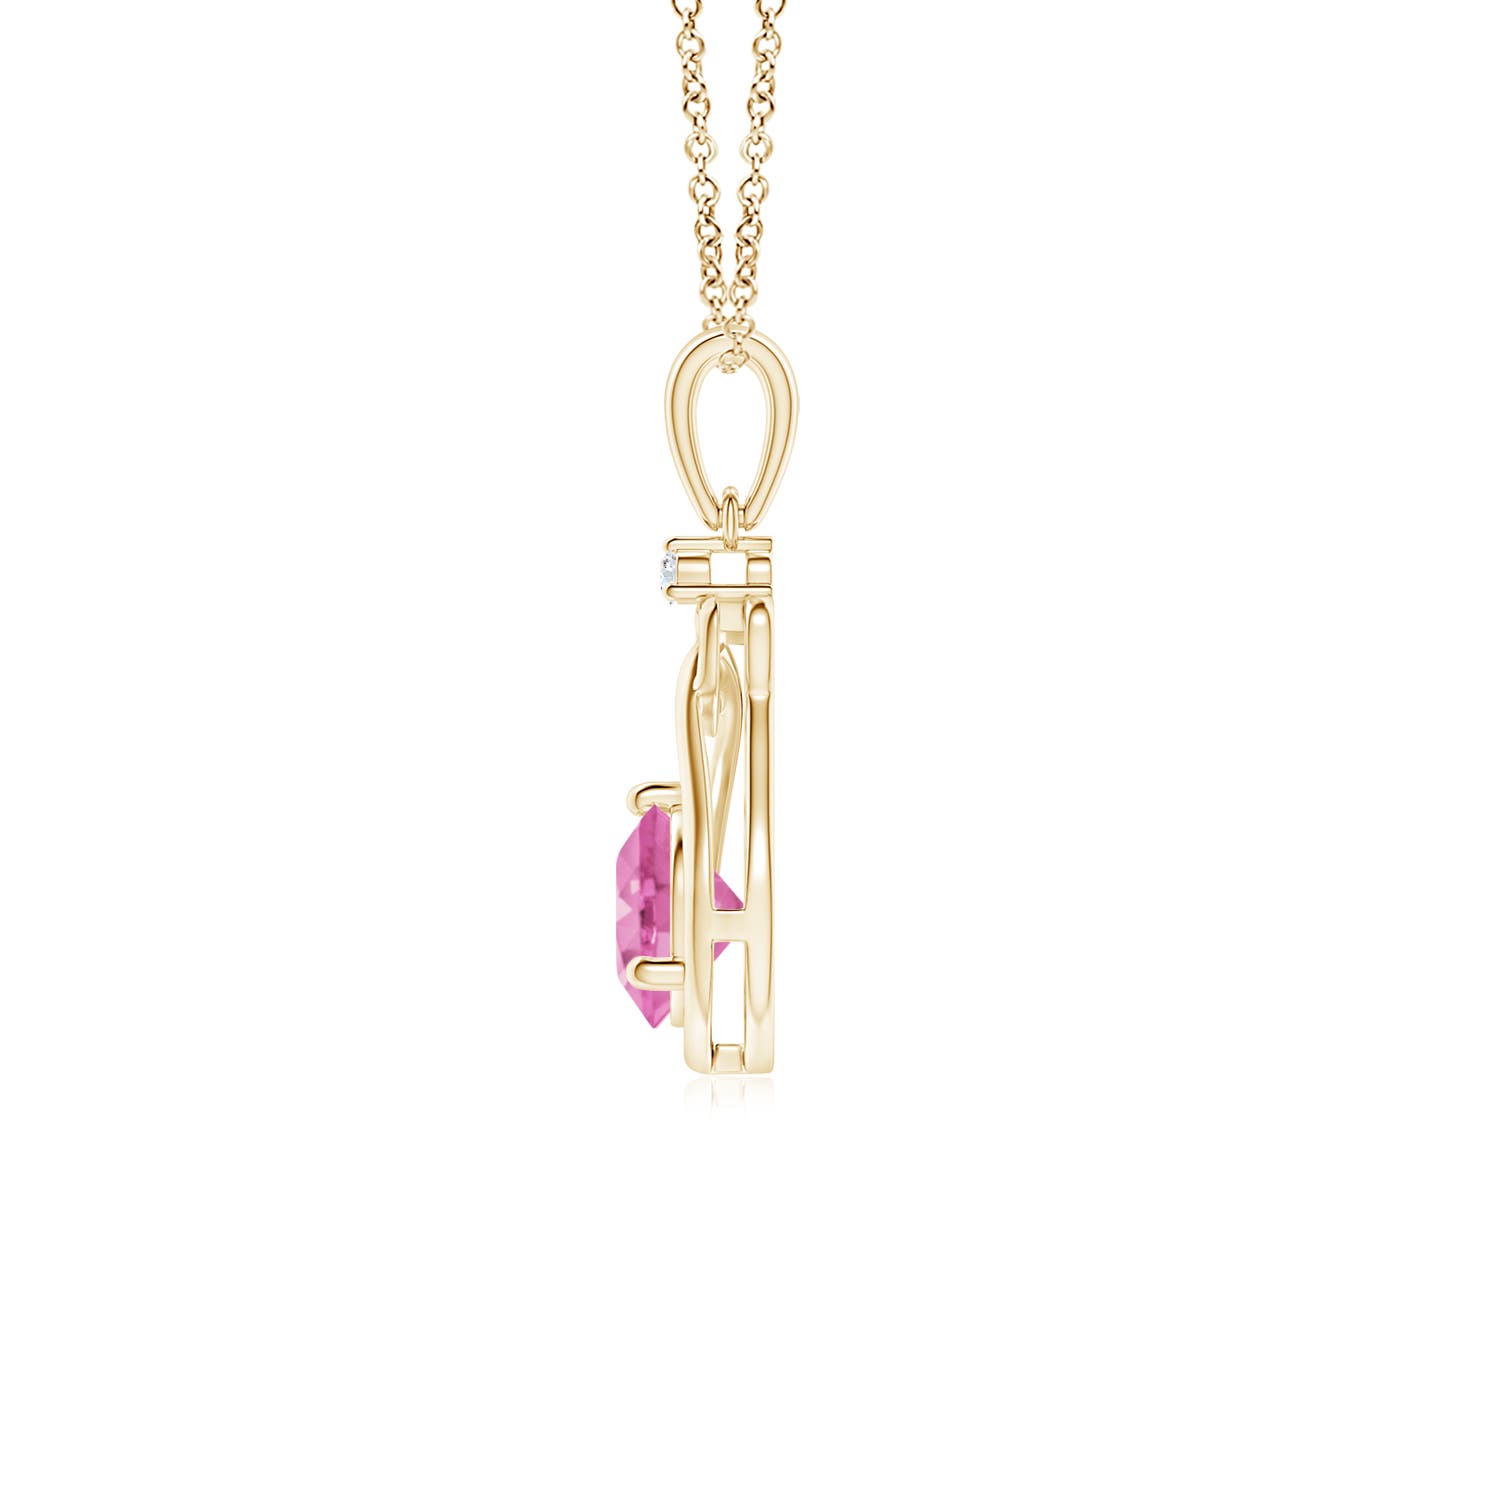 AA - Pink Sapphire / 0.61 CT / 14 KT Yellow Gold